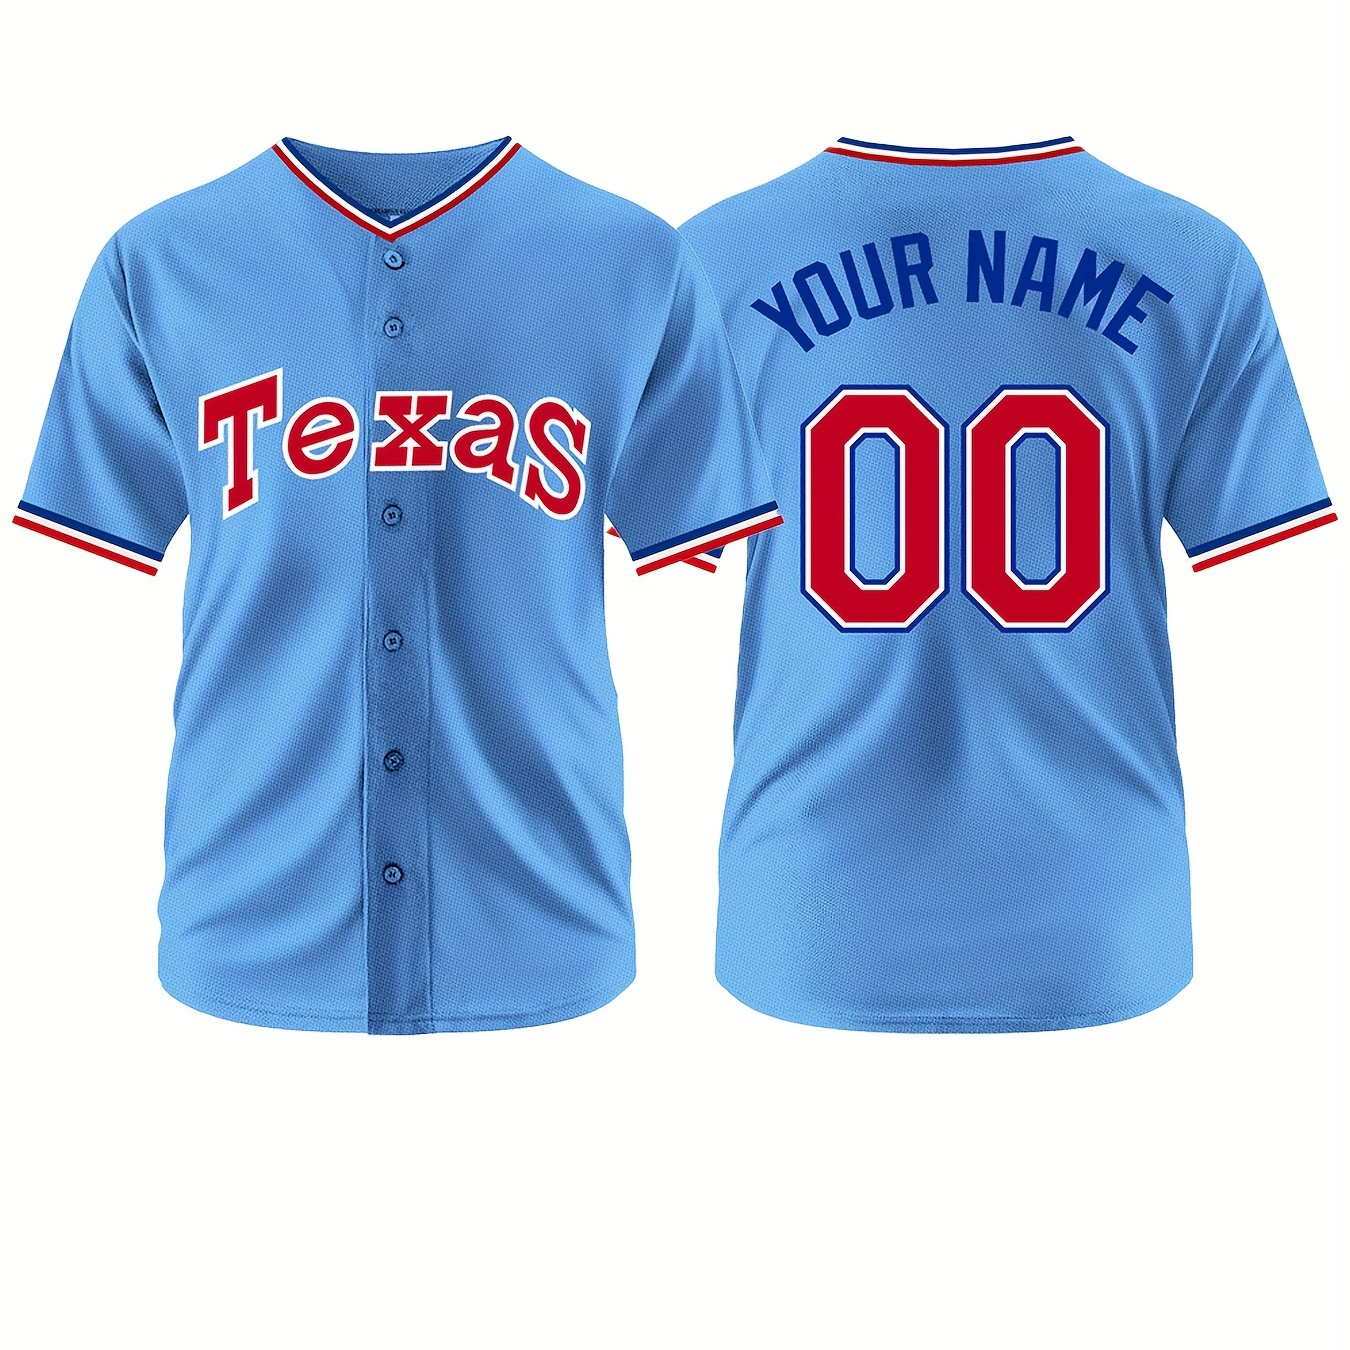 

Men's "texas" V-neck Baseball Jersey With Customized Name And Number, Comfy Top For Summer Sport